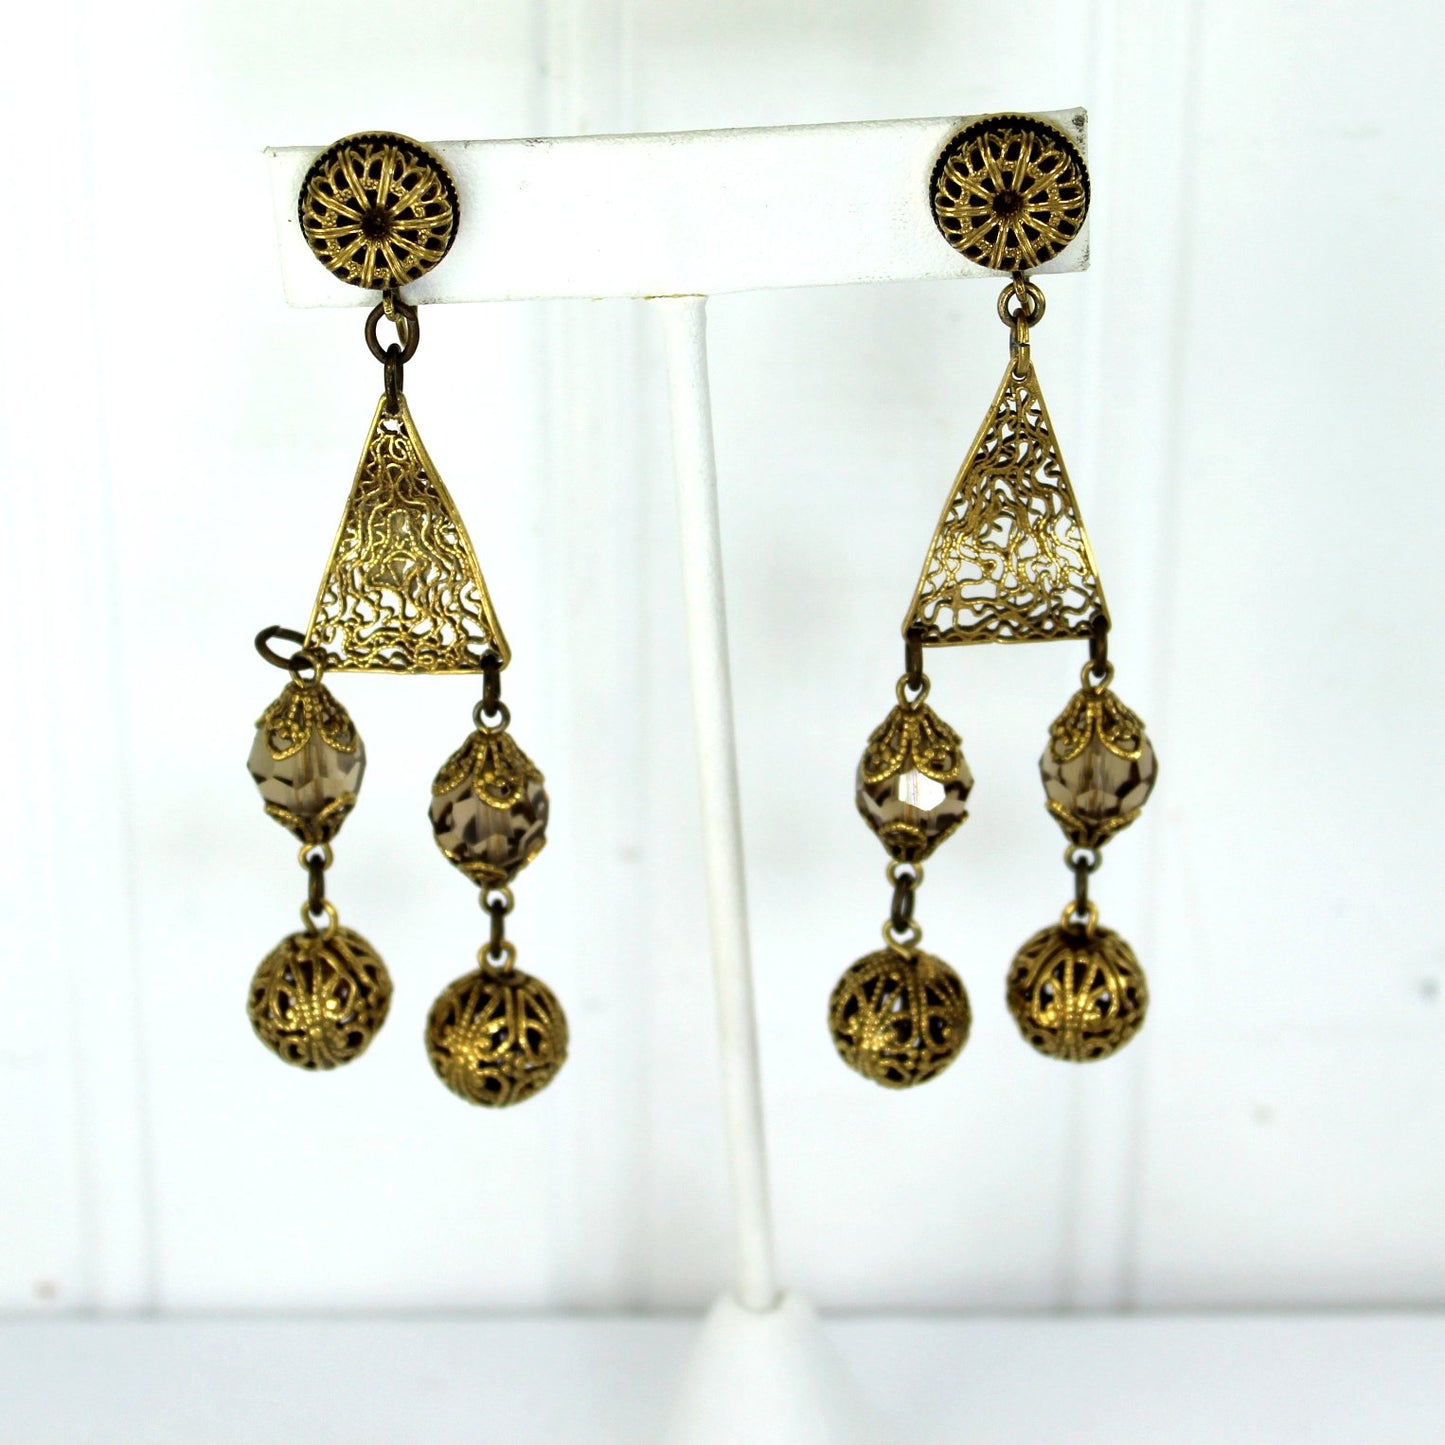 Accessocraft NYC Screw Back Earrings Filigree Crystal Beads Long Chandeliers hanging view